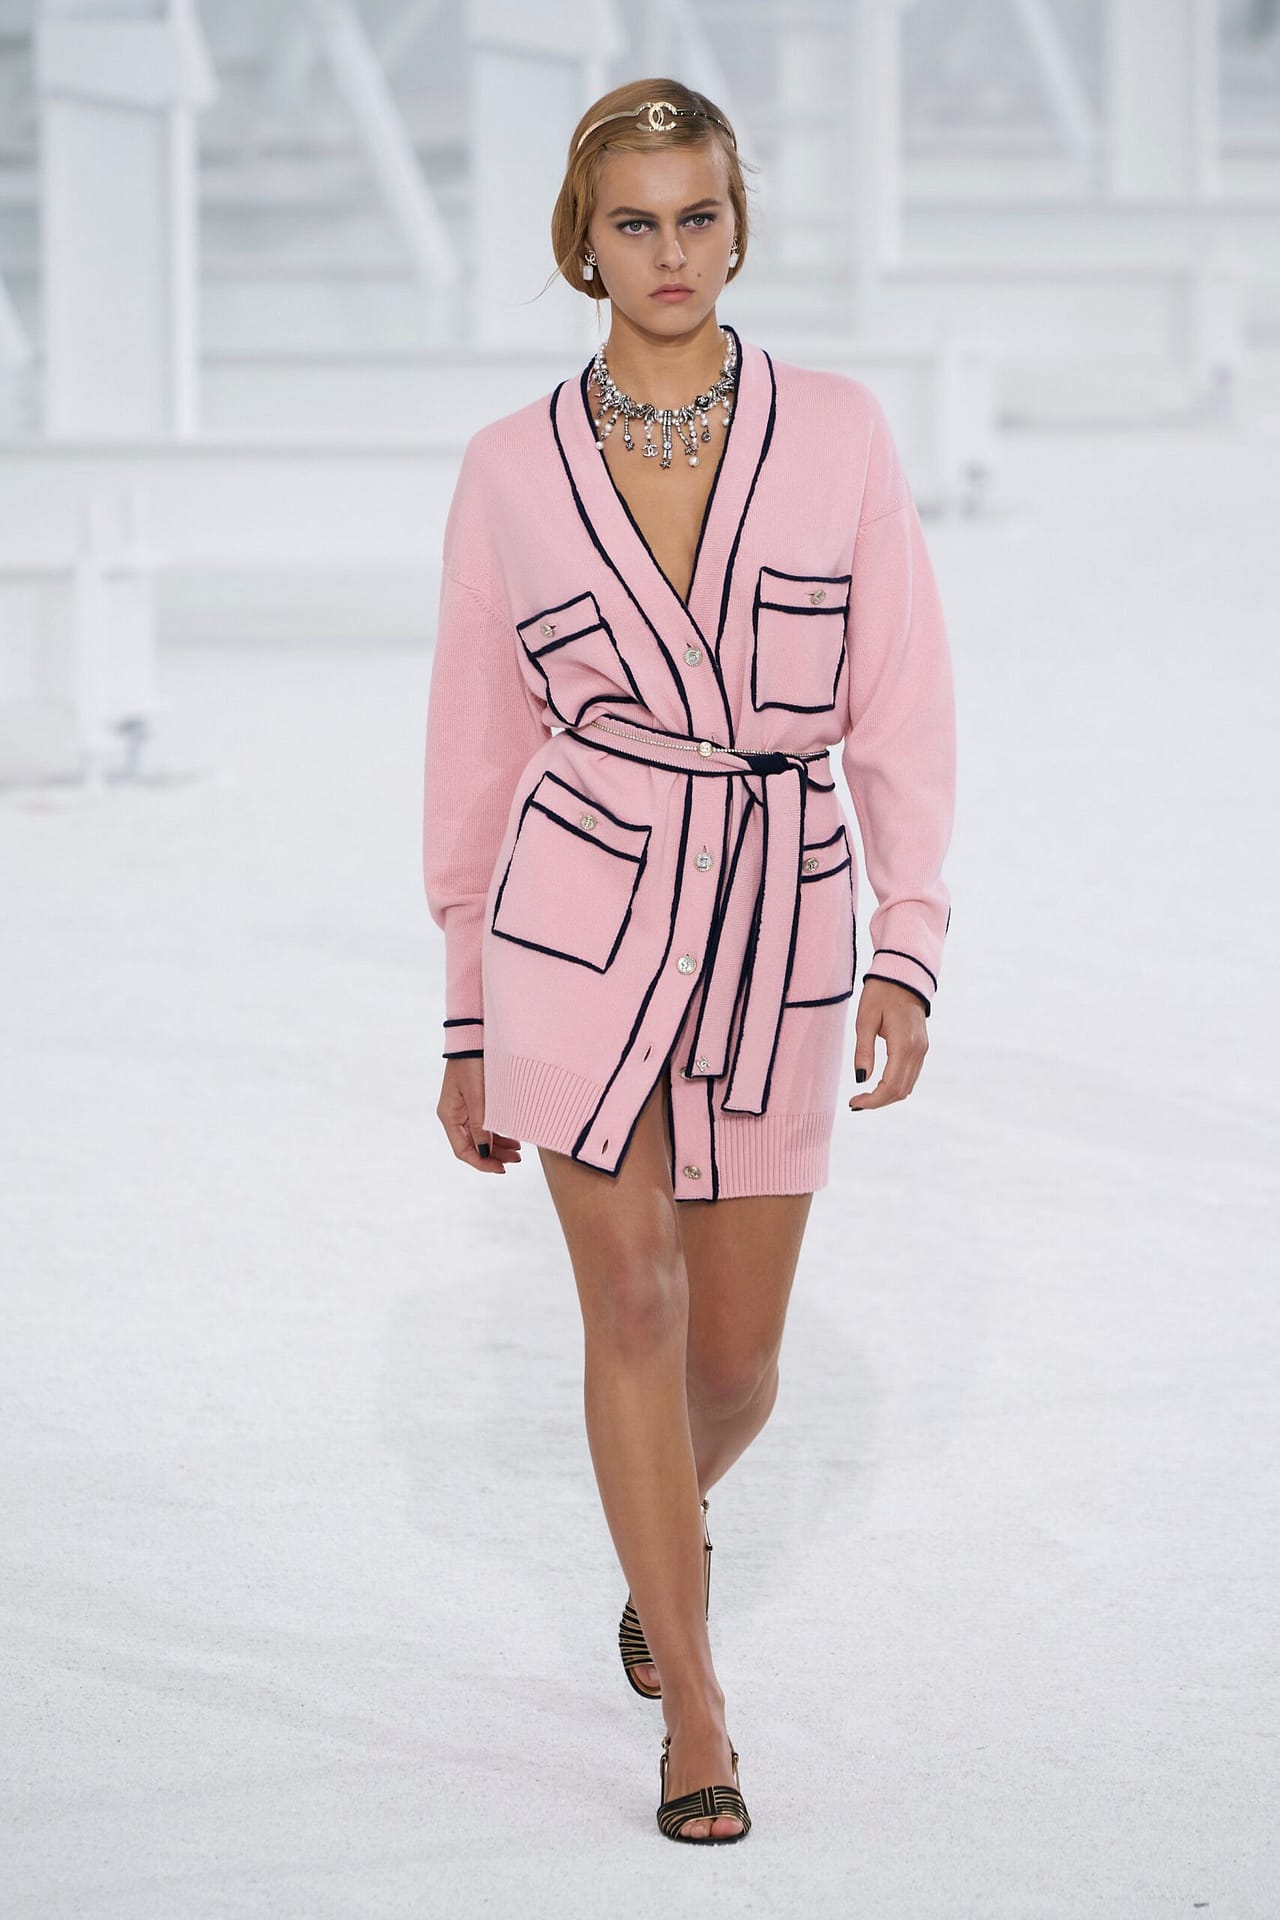 Chanel Ready-to-Wear Spring 2021